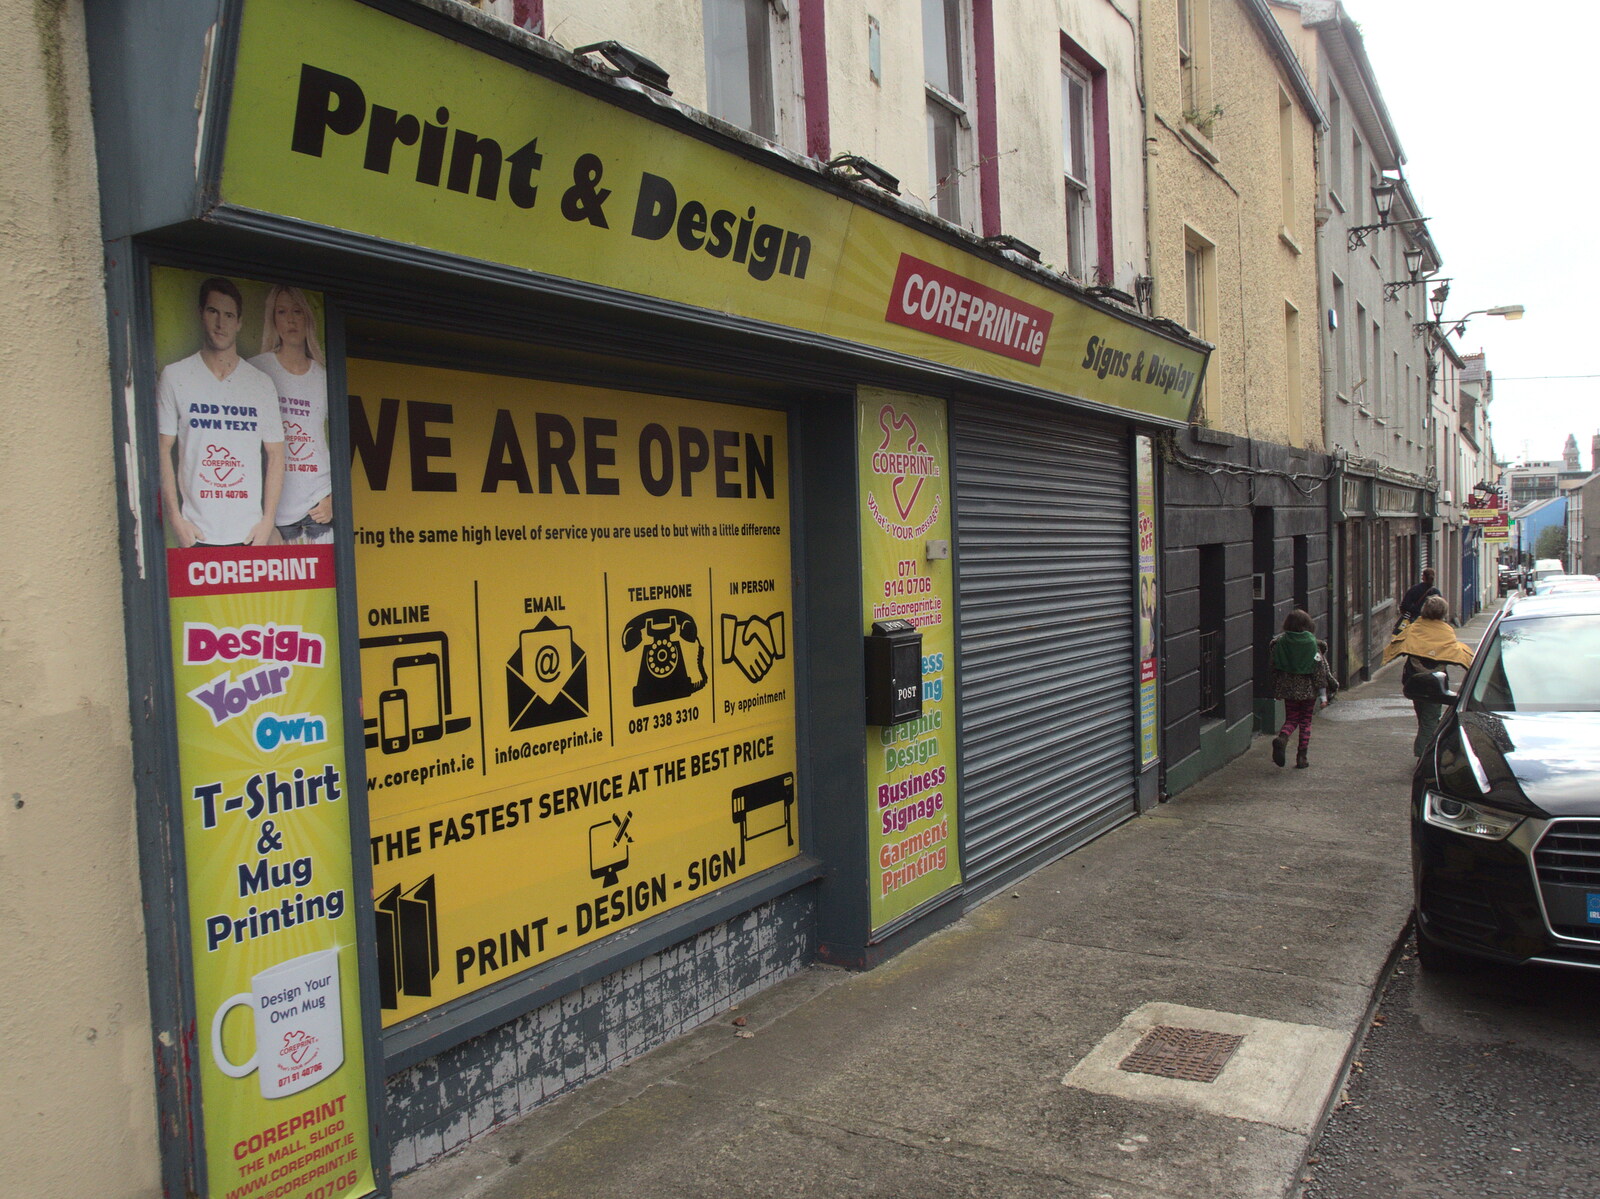 This print shop is definitely not open from Walks Around Benbulben and Carrowmore, County Sligo, Ireland - 13th August 2021